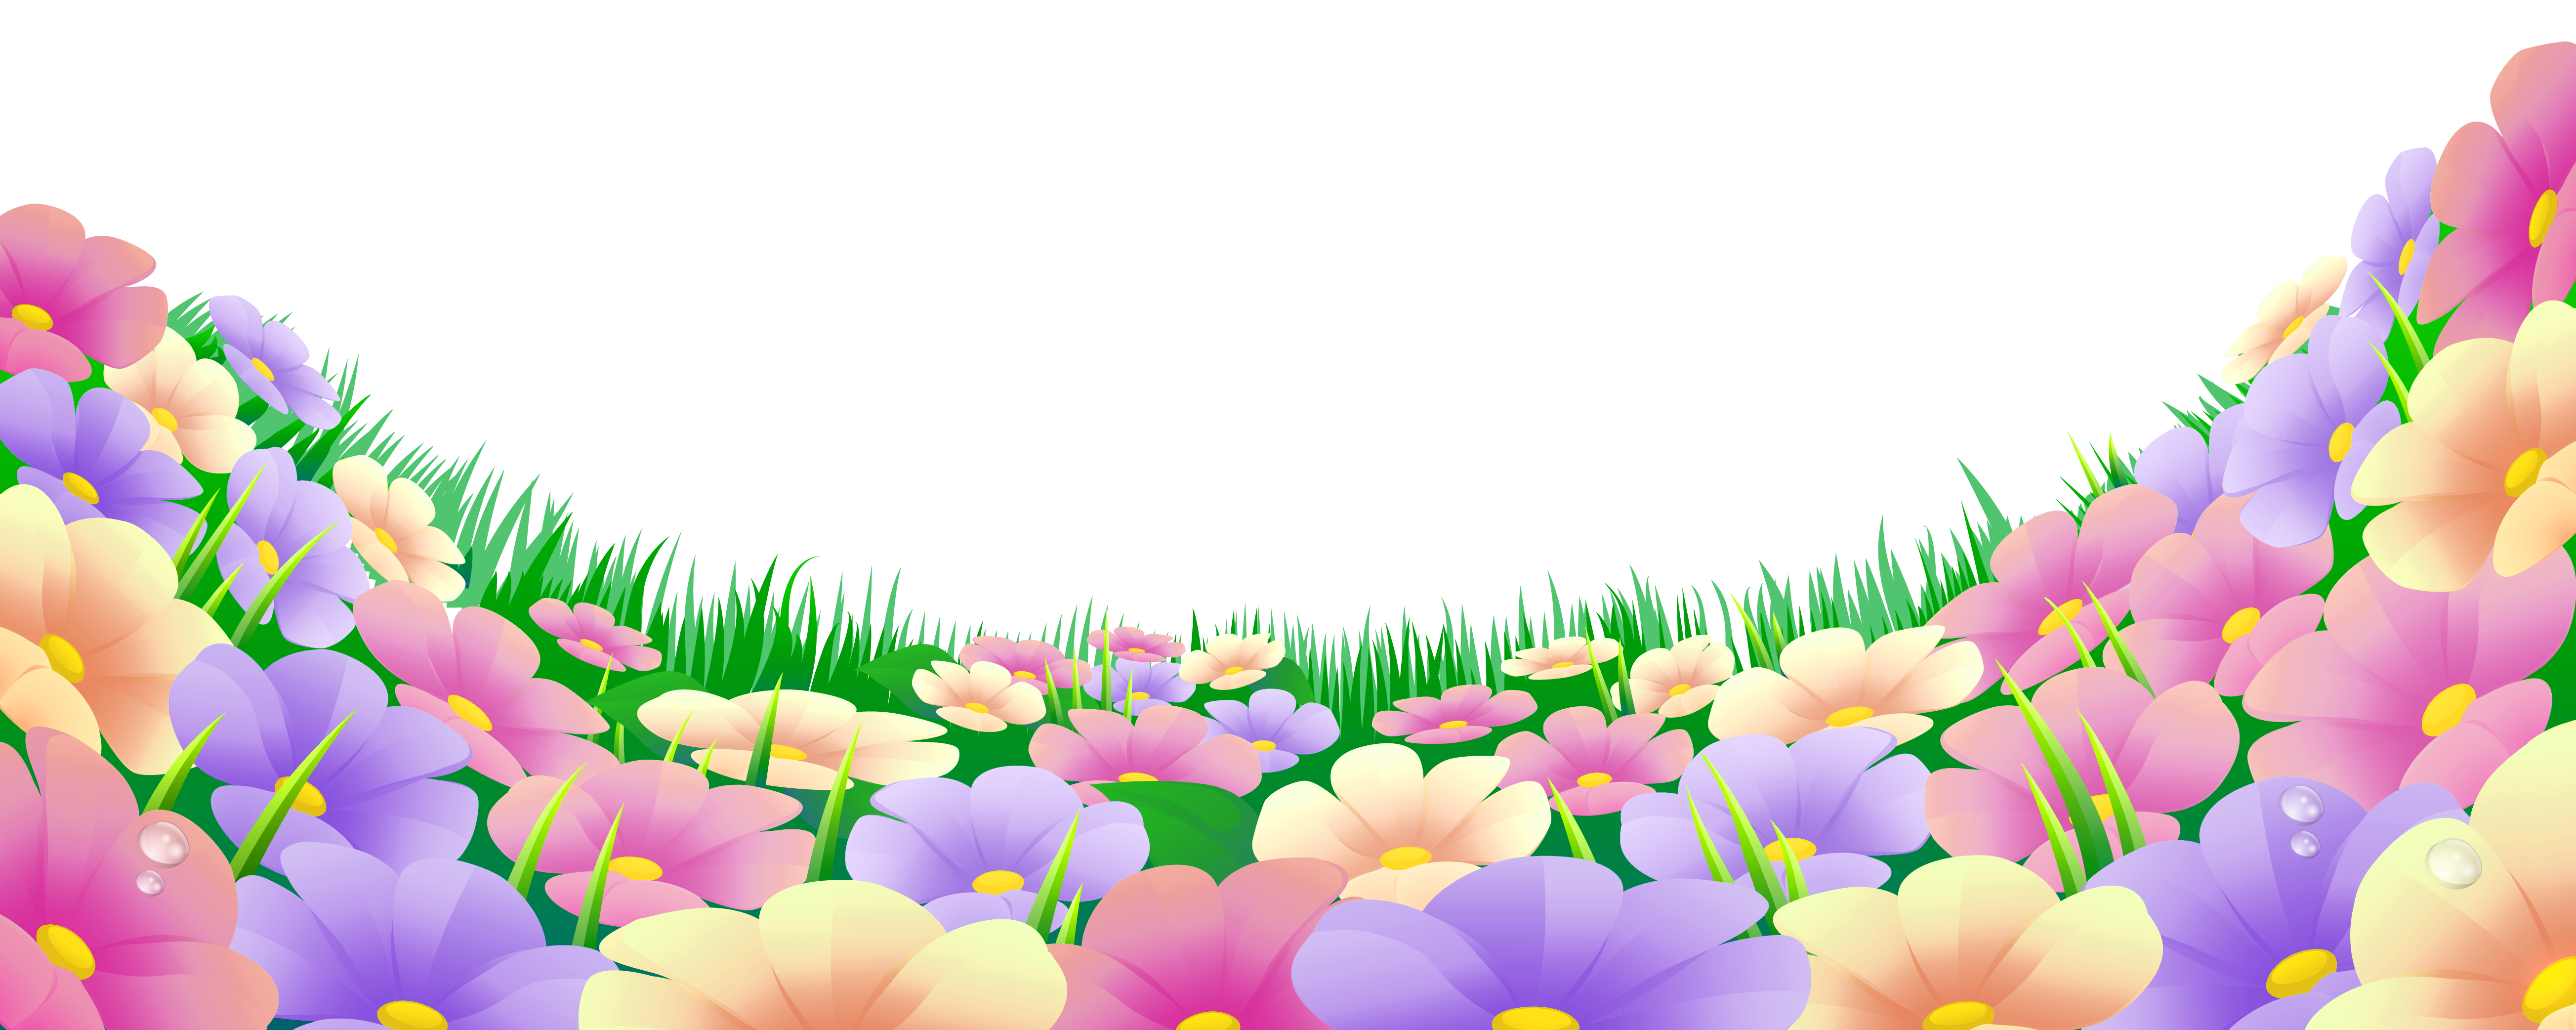 Grass with beautiful png. Flowers clipart garden